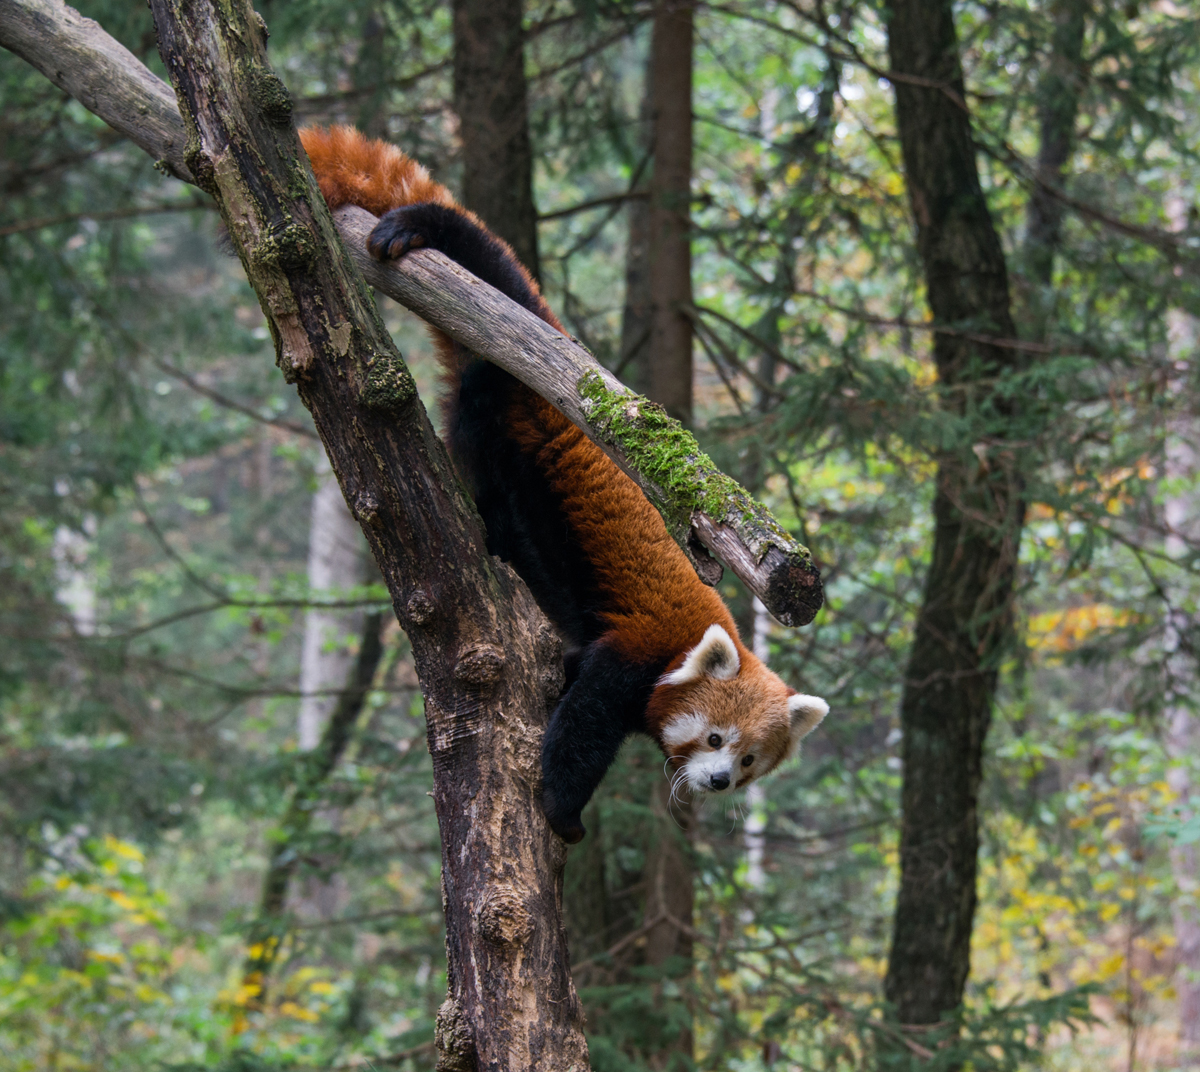 red panda in a tree